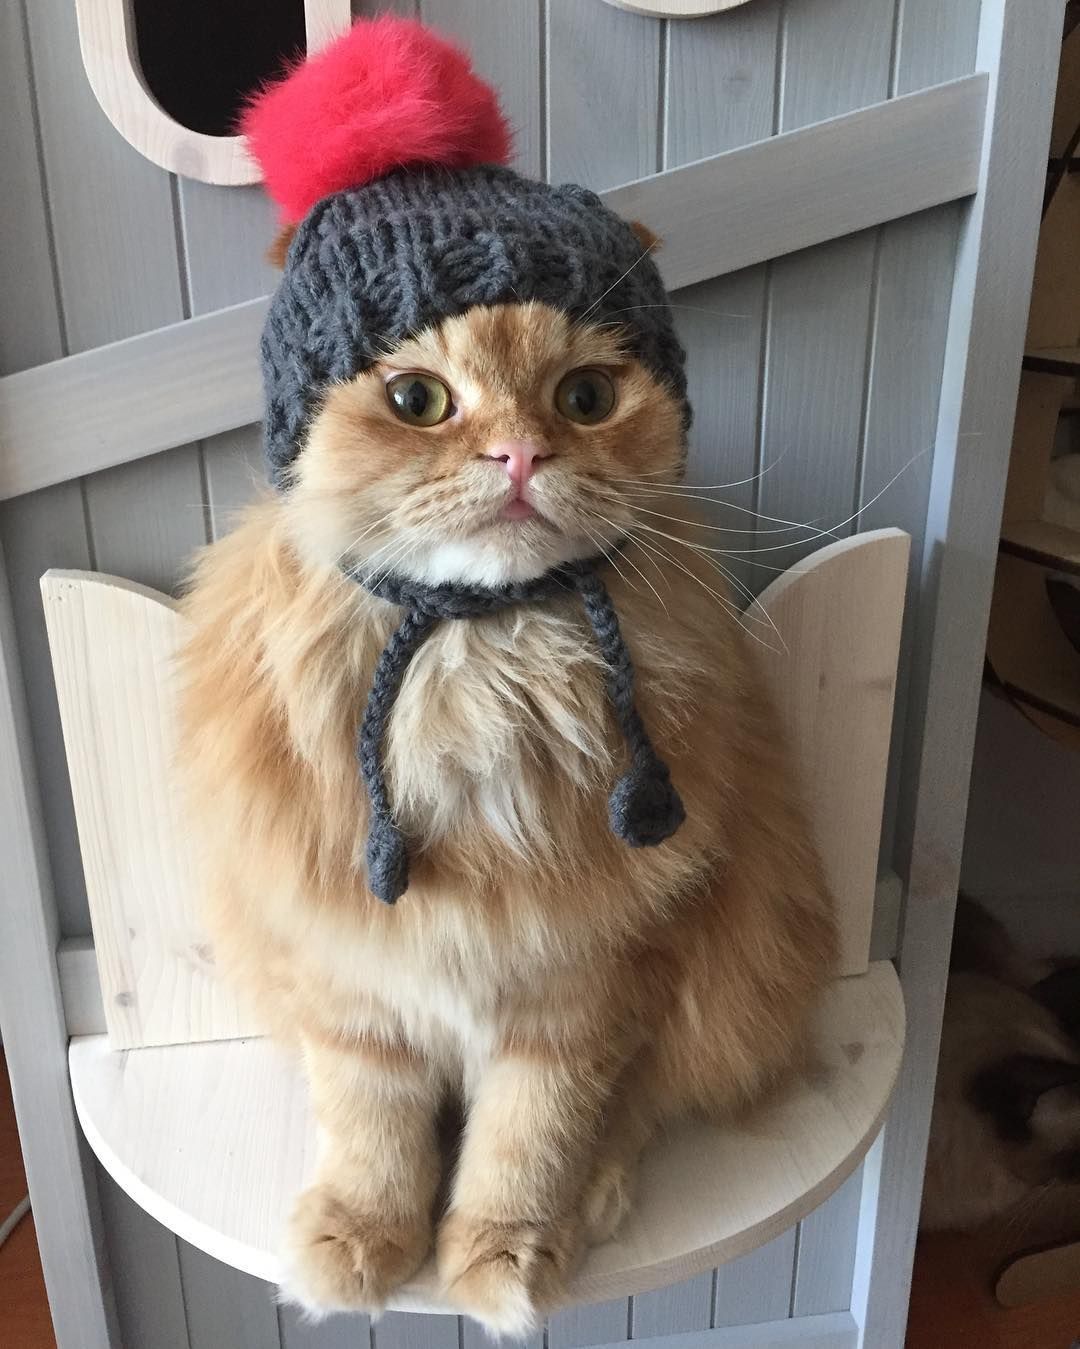 My cat wouldnt sit with a hat on long enough for me to take a photo…I love